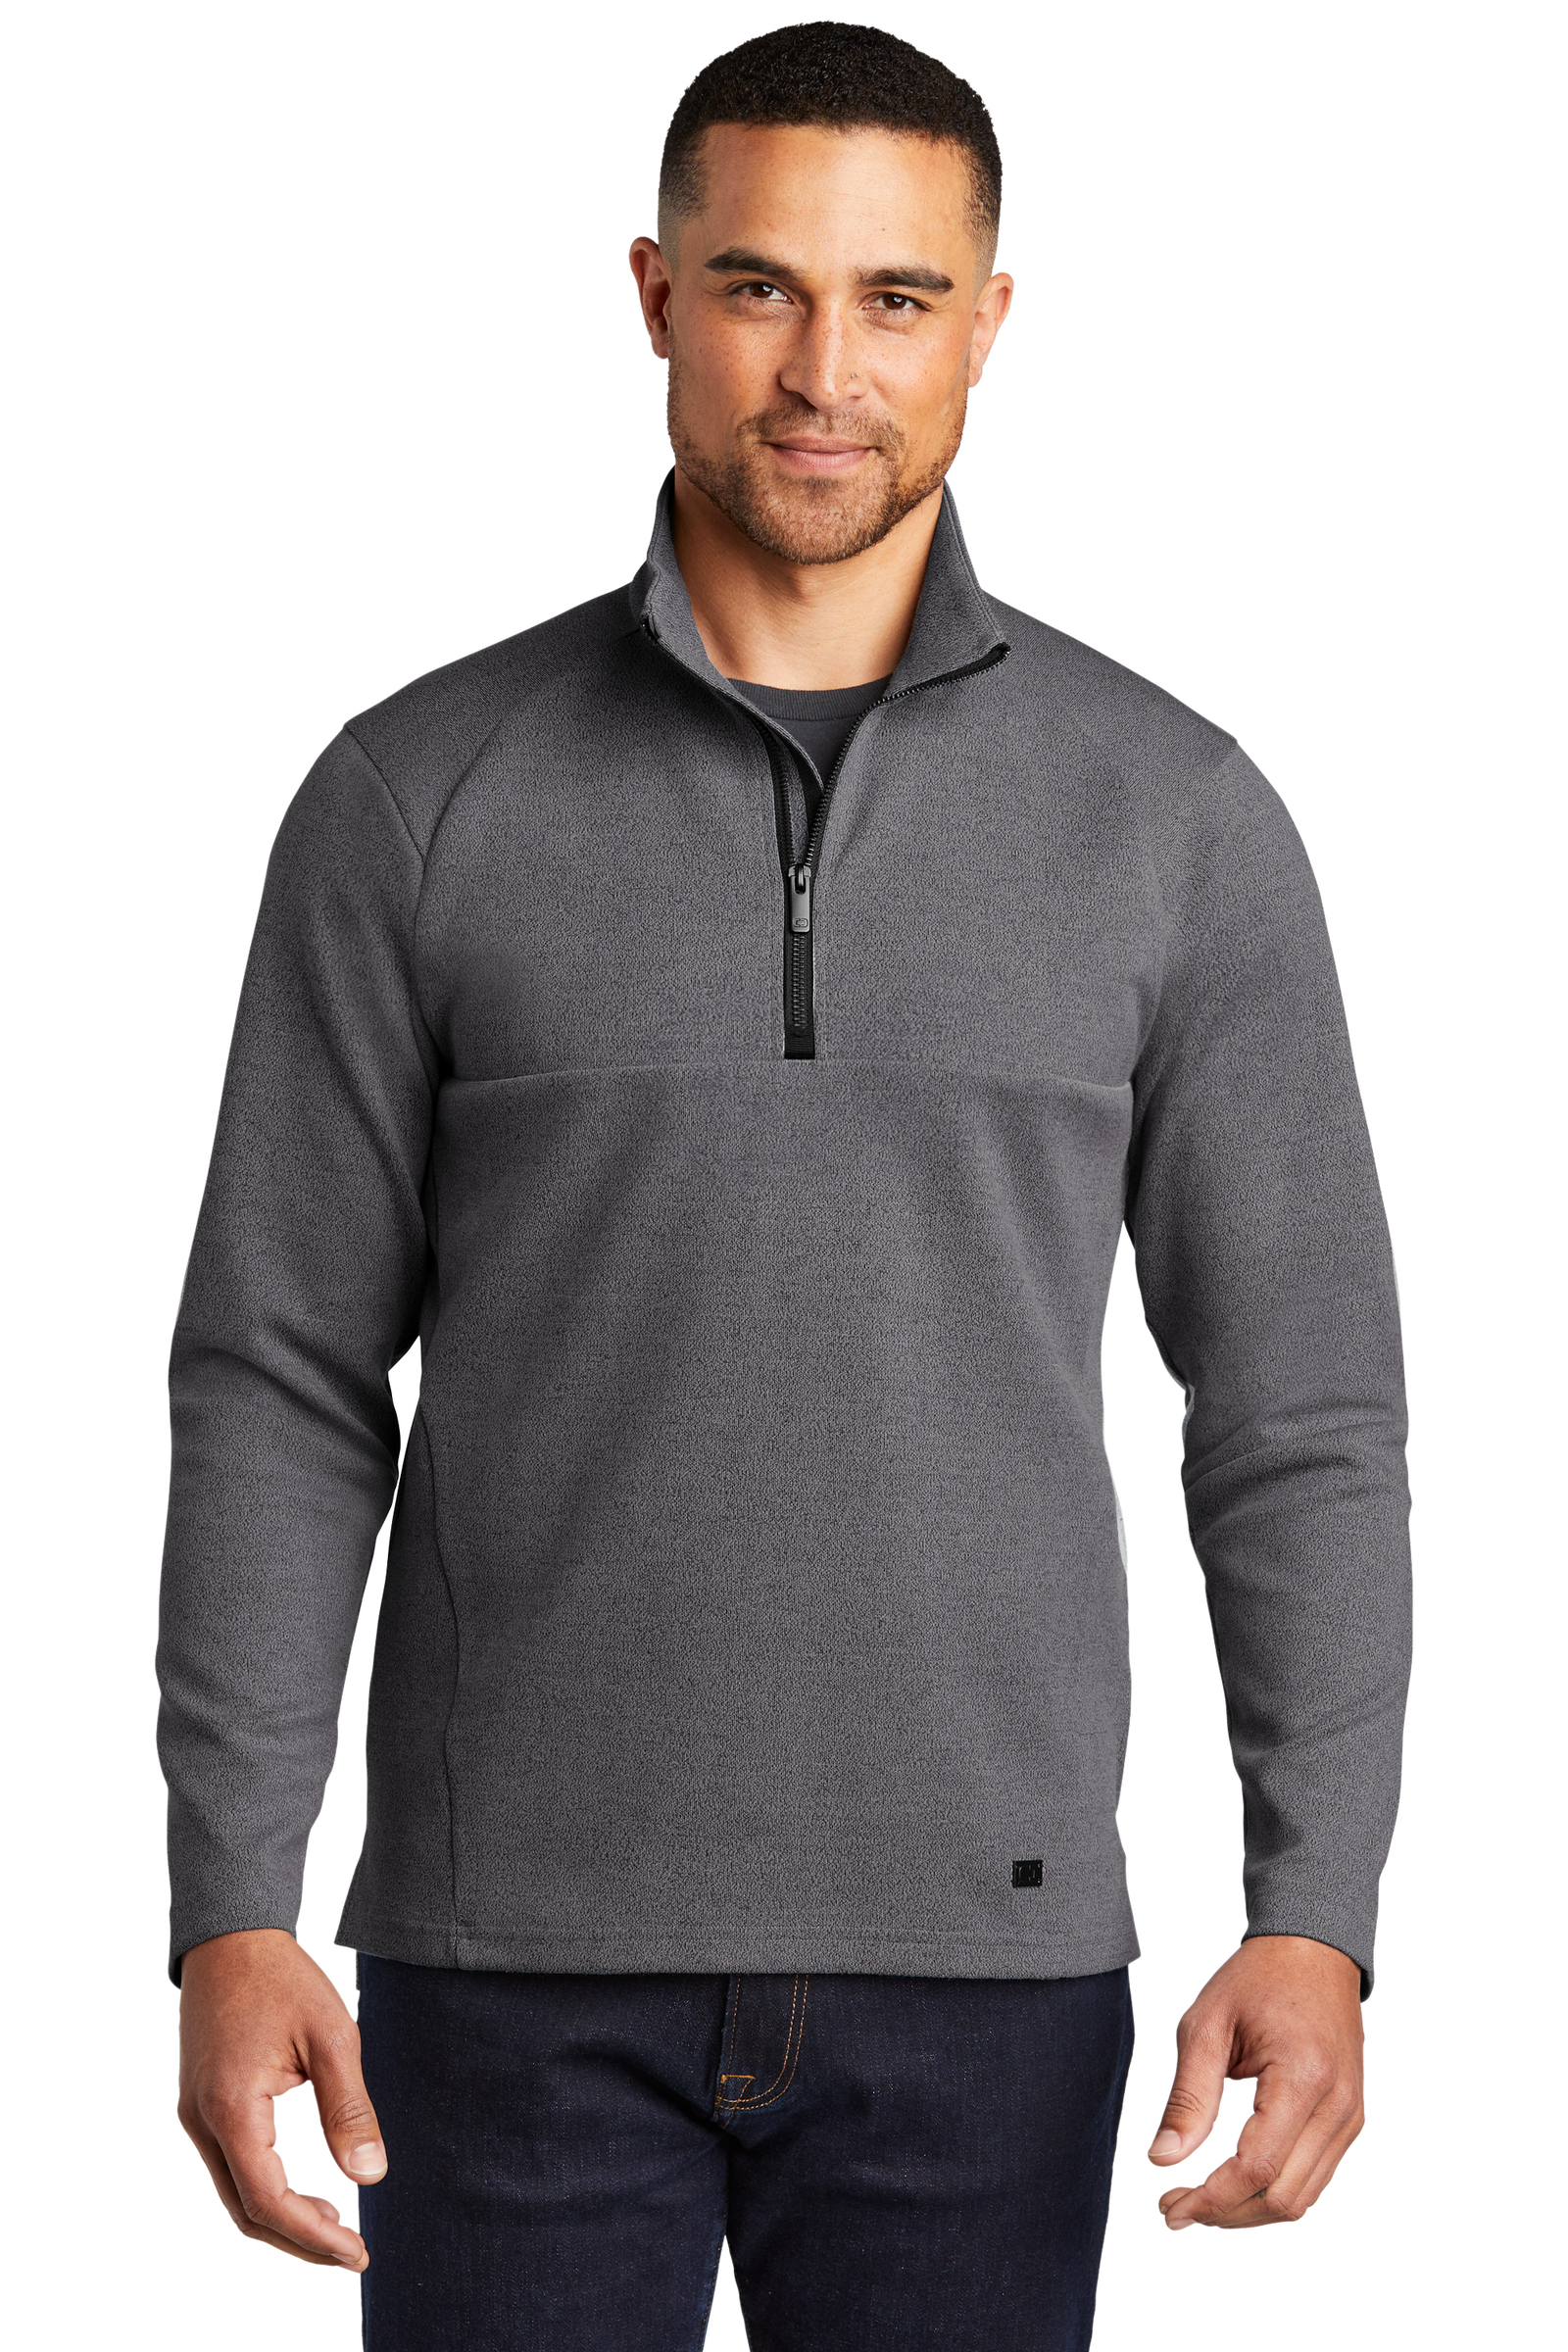 OGIO Embroidered Men's Transition 1/4-Zip